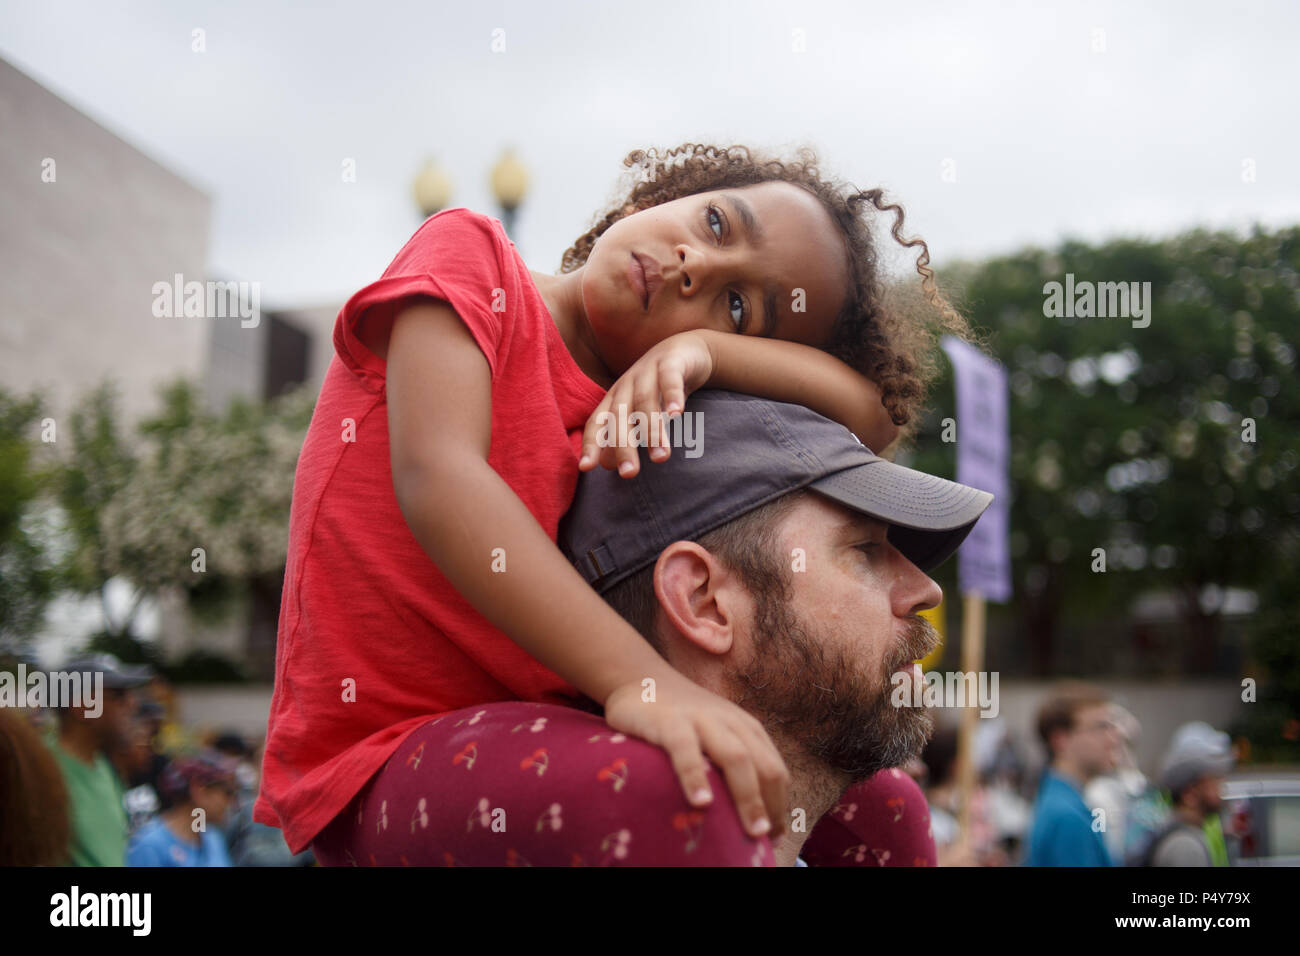 Washington, USA. 23rd June, 2018. A young protestor rests her head during the Stand Aganst Poverty March. The event is organized by the Poor People's Campaign, led by Rev. William Barber and Rev. Liz Theoharis and reviving a mission led by Dr. Martin Luther King, Jr. Credit: Michael Candelori/Pacific Press/Alamy Live News Stock Photo